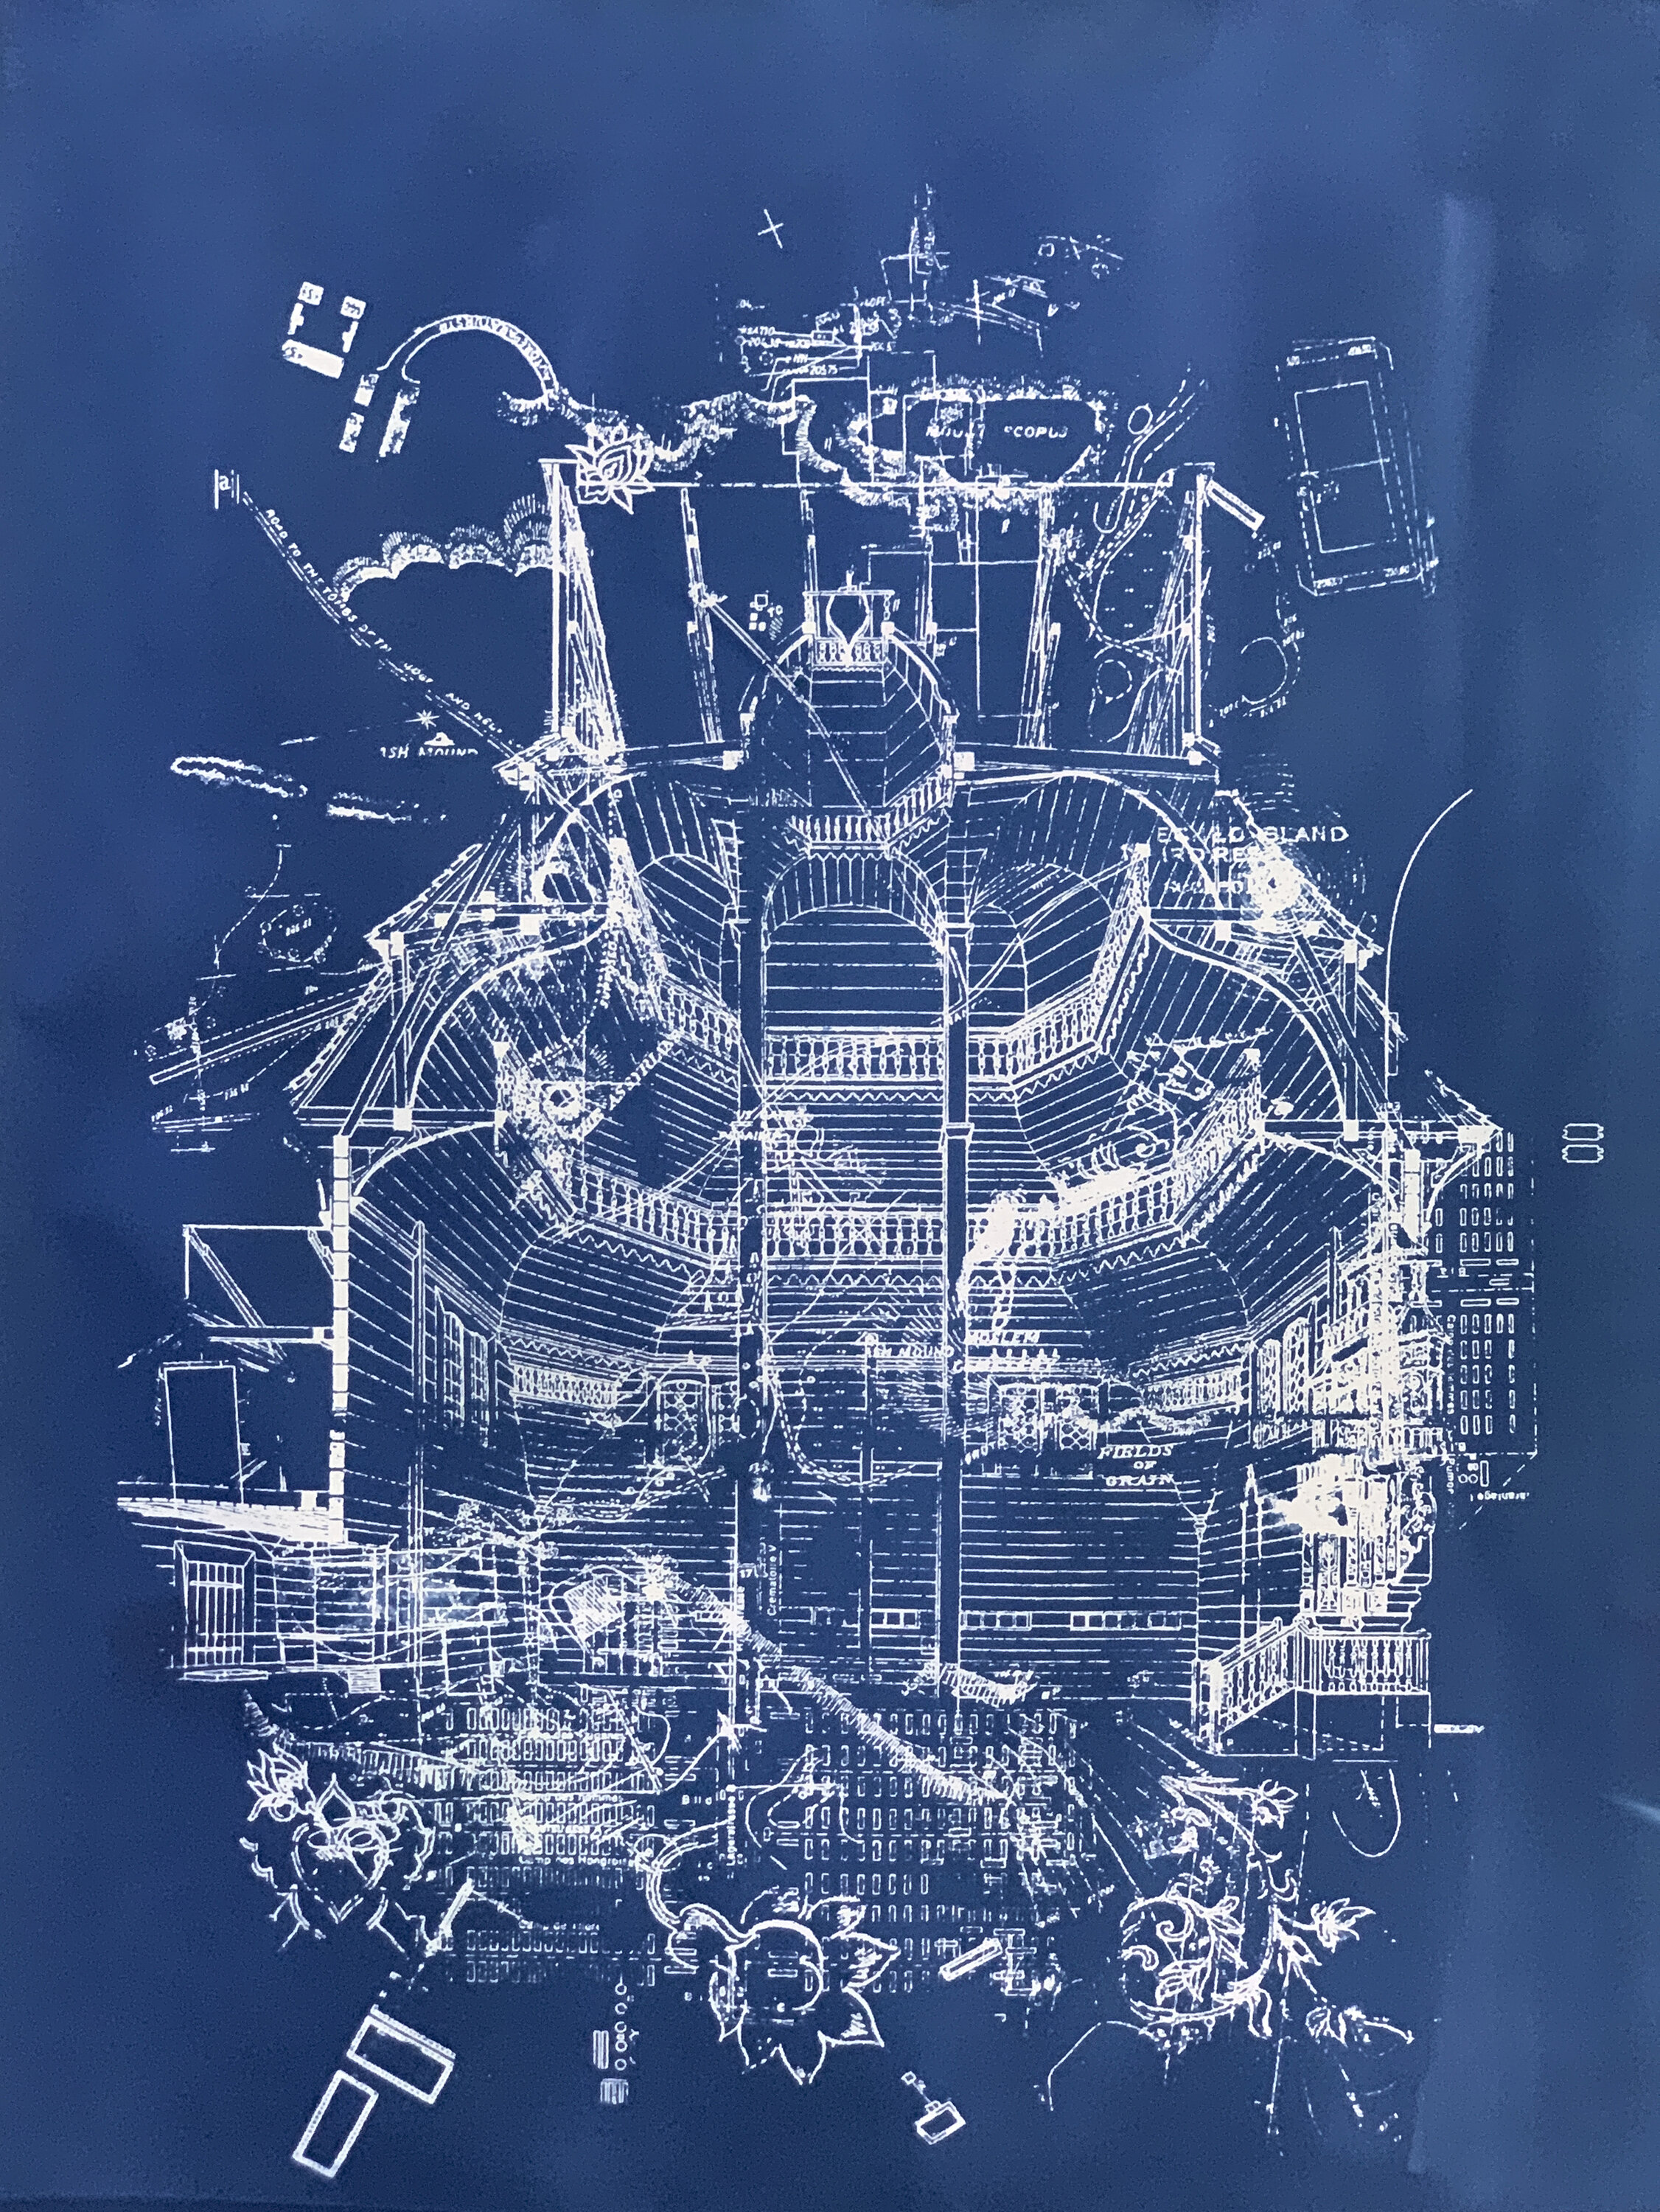  Maya Ciarrocchi  This Place Has a Body , 2020   Cyanotype on Paper   30 x 22 inches   Ed. 1/3, 2 AP’s  